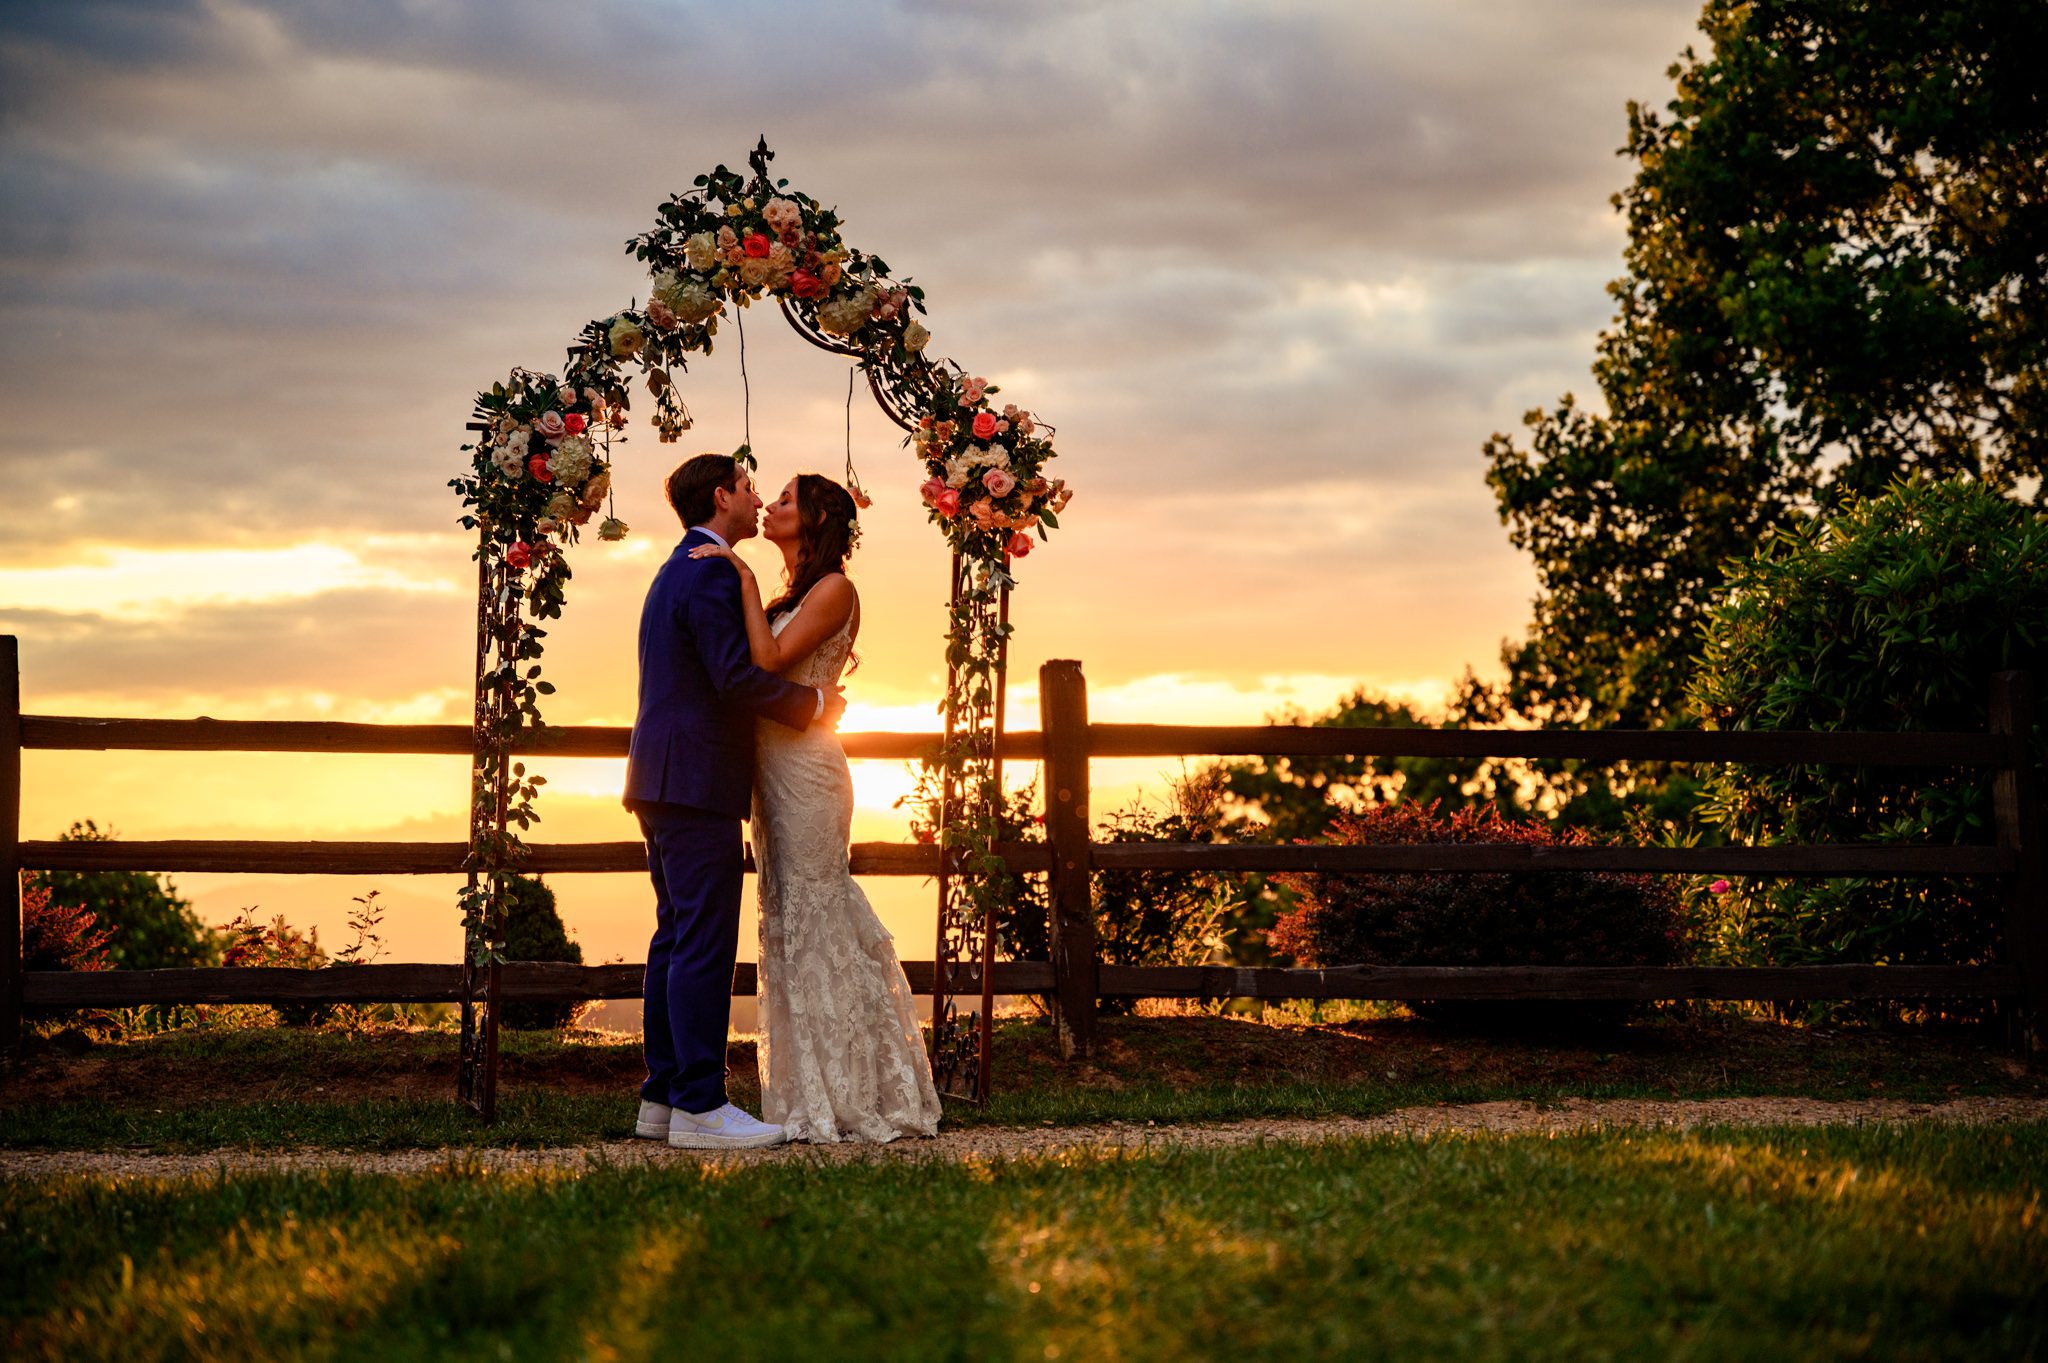 wedding ceremony on the lawn of crest pavilion with blue ridge mountains in background